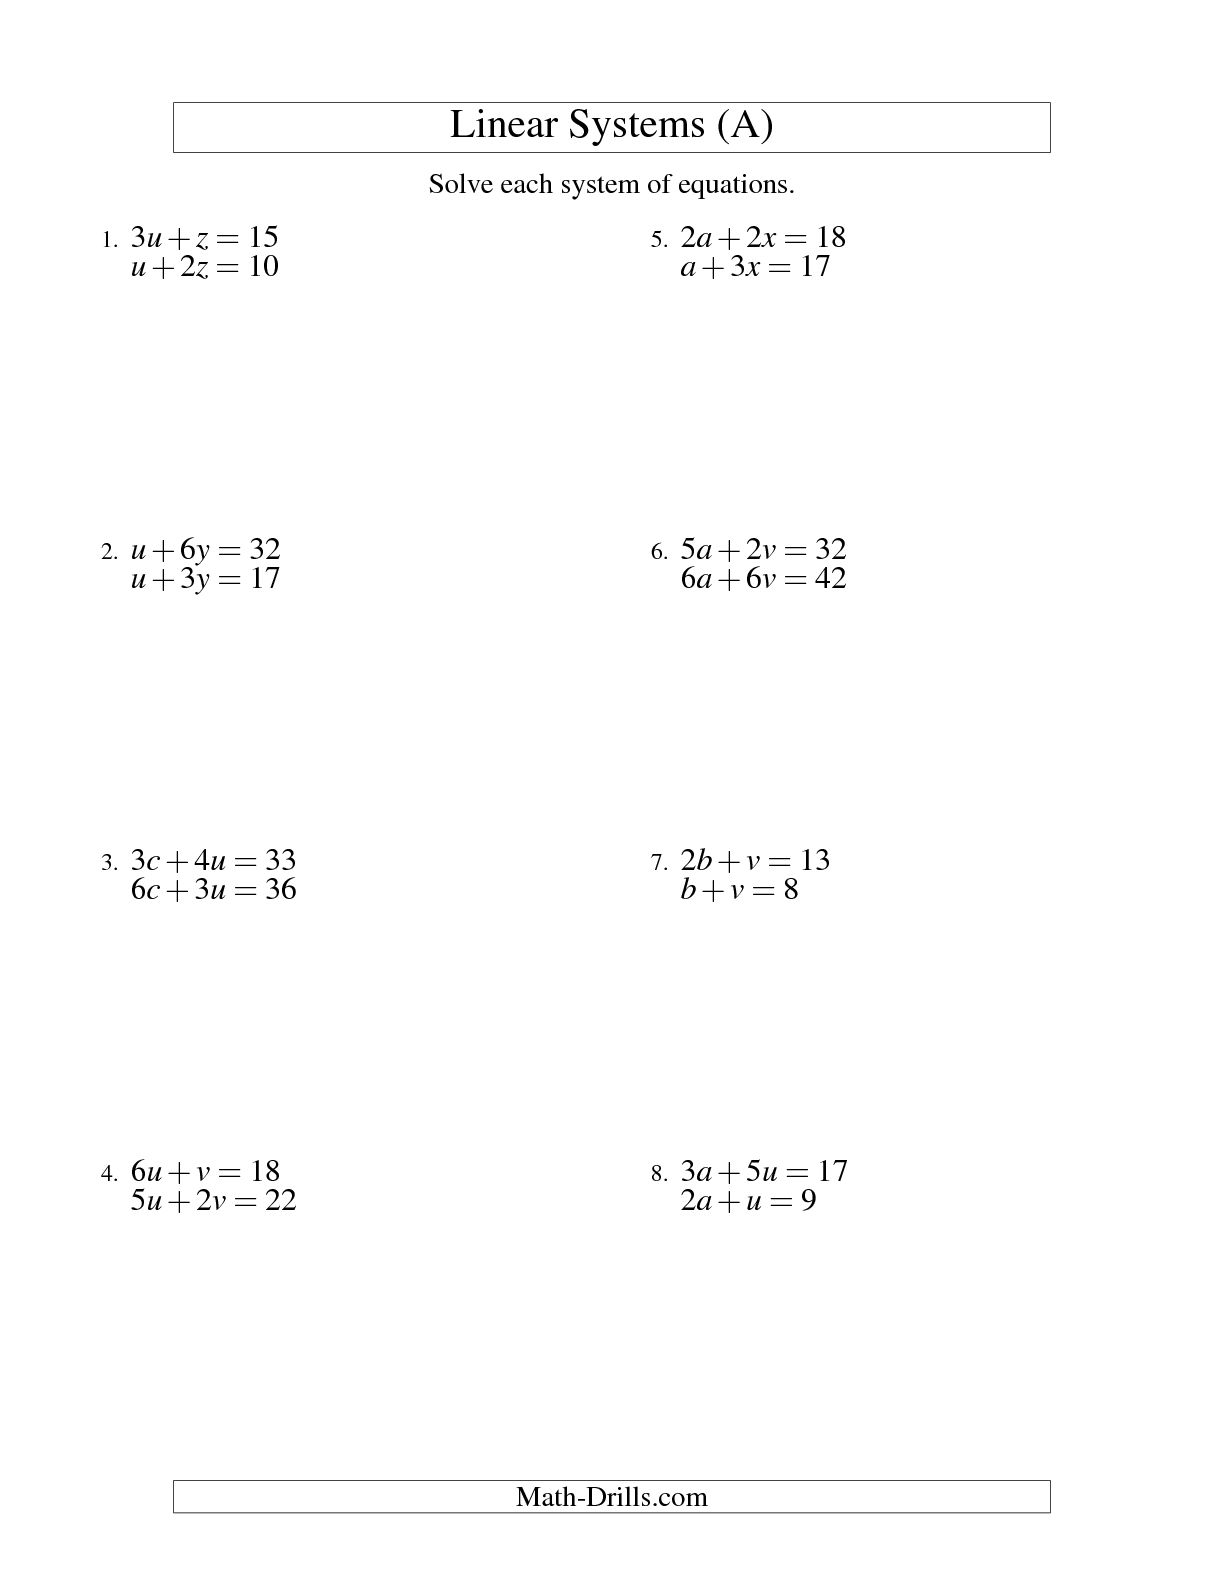 Systems of Linear Equations Two Variables Worksheets Image